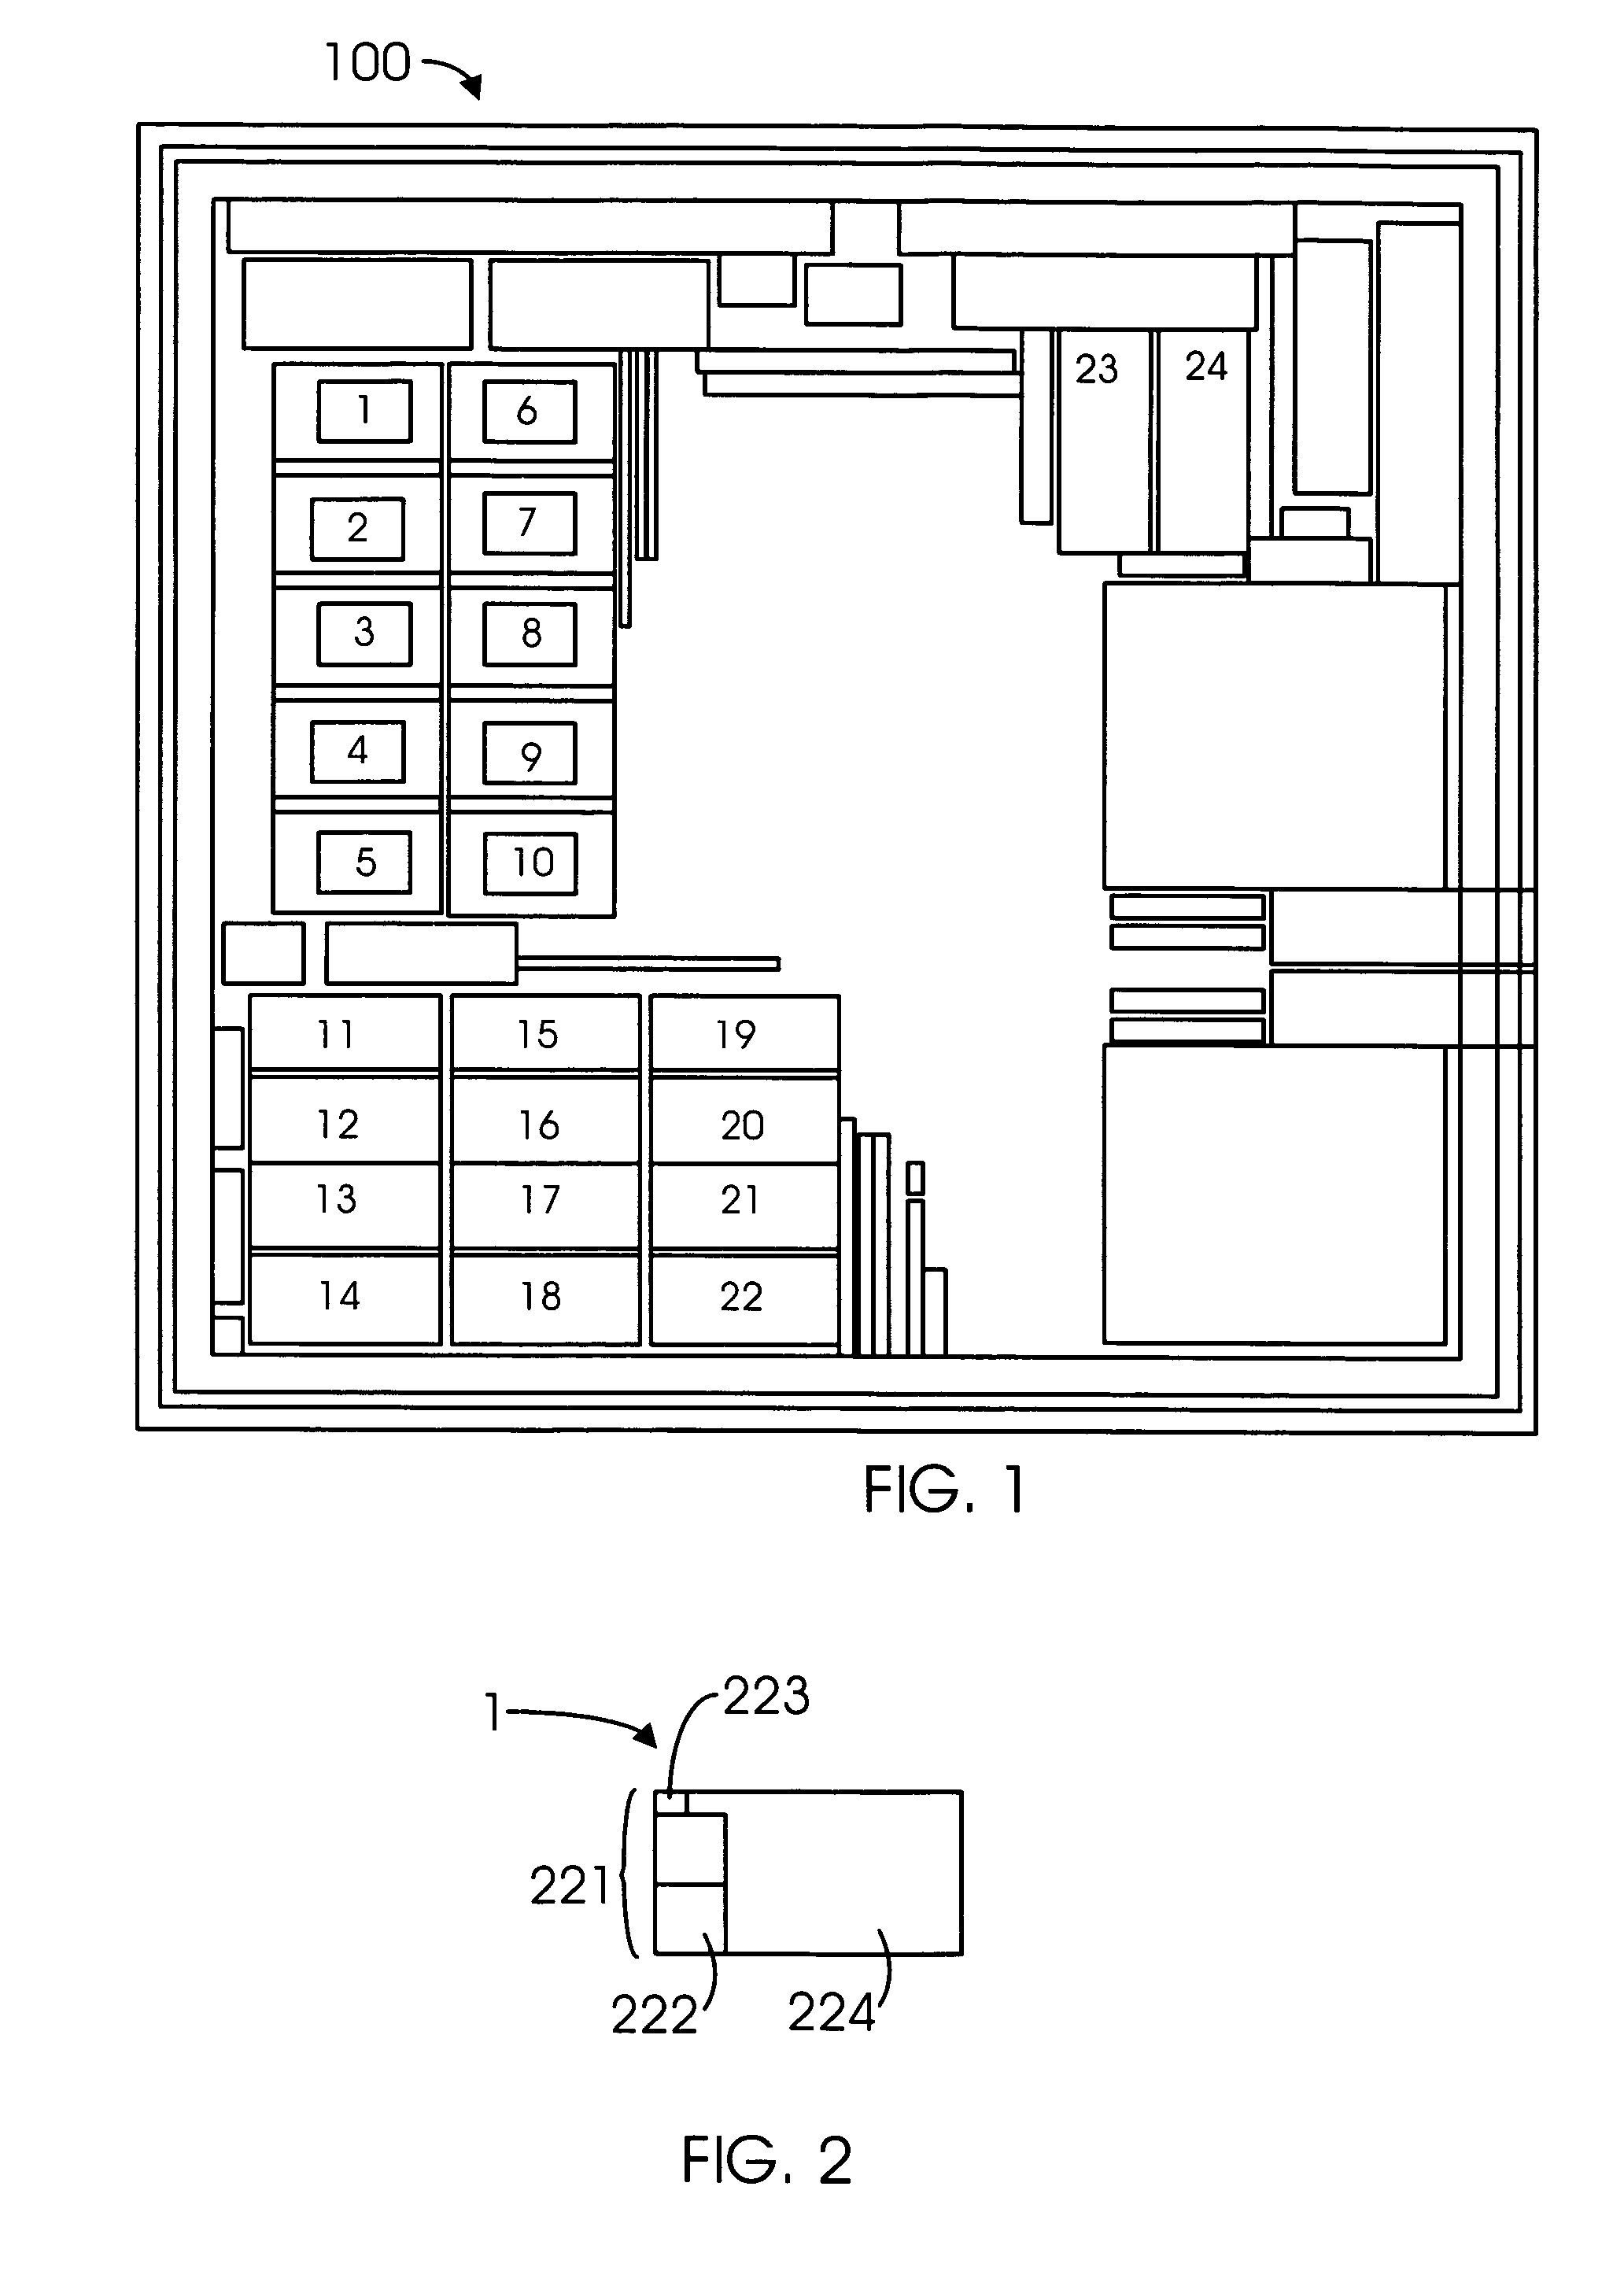 Process for conducting high-speed bitmapping of memory cells during production